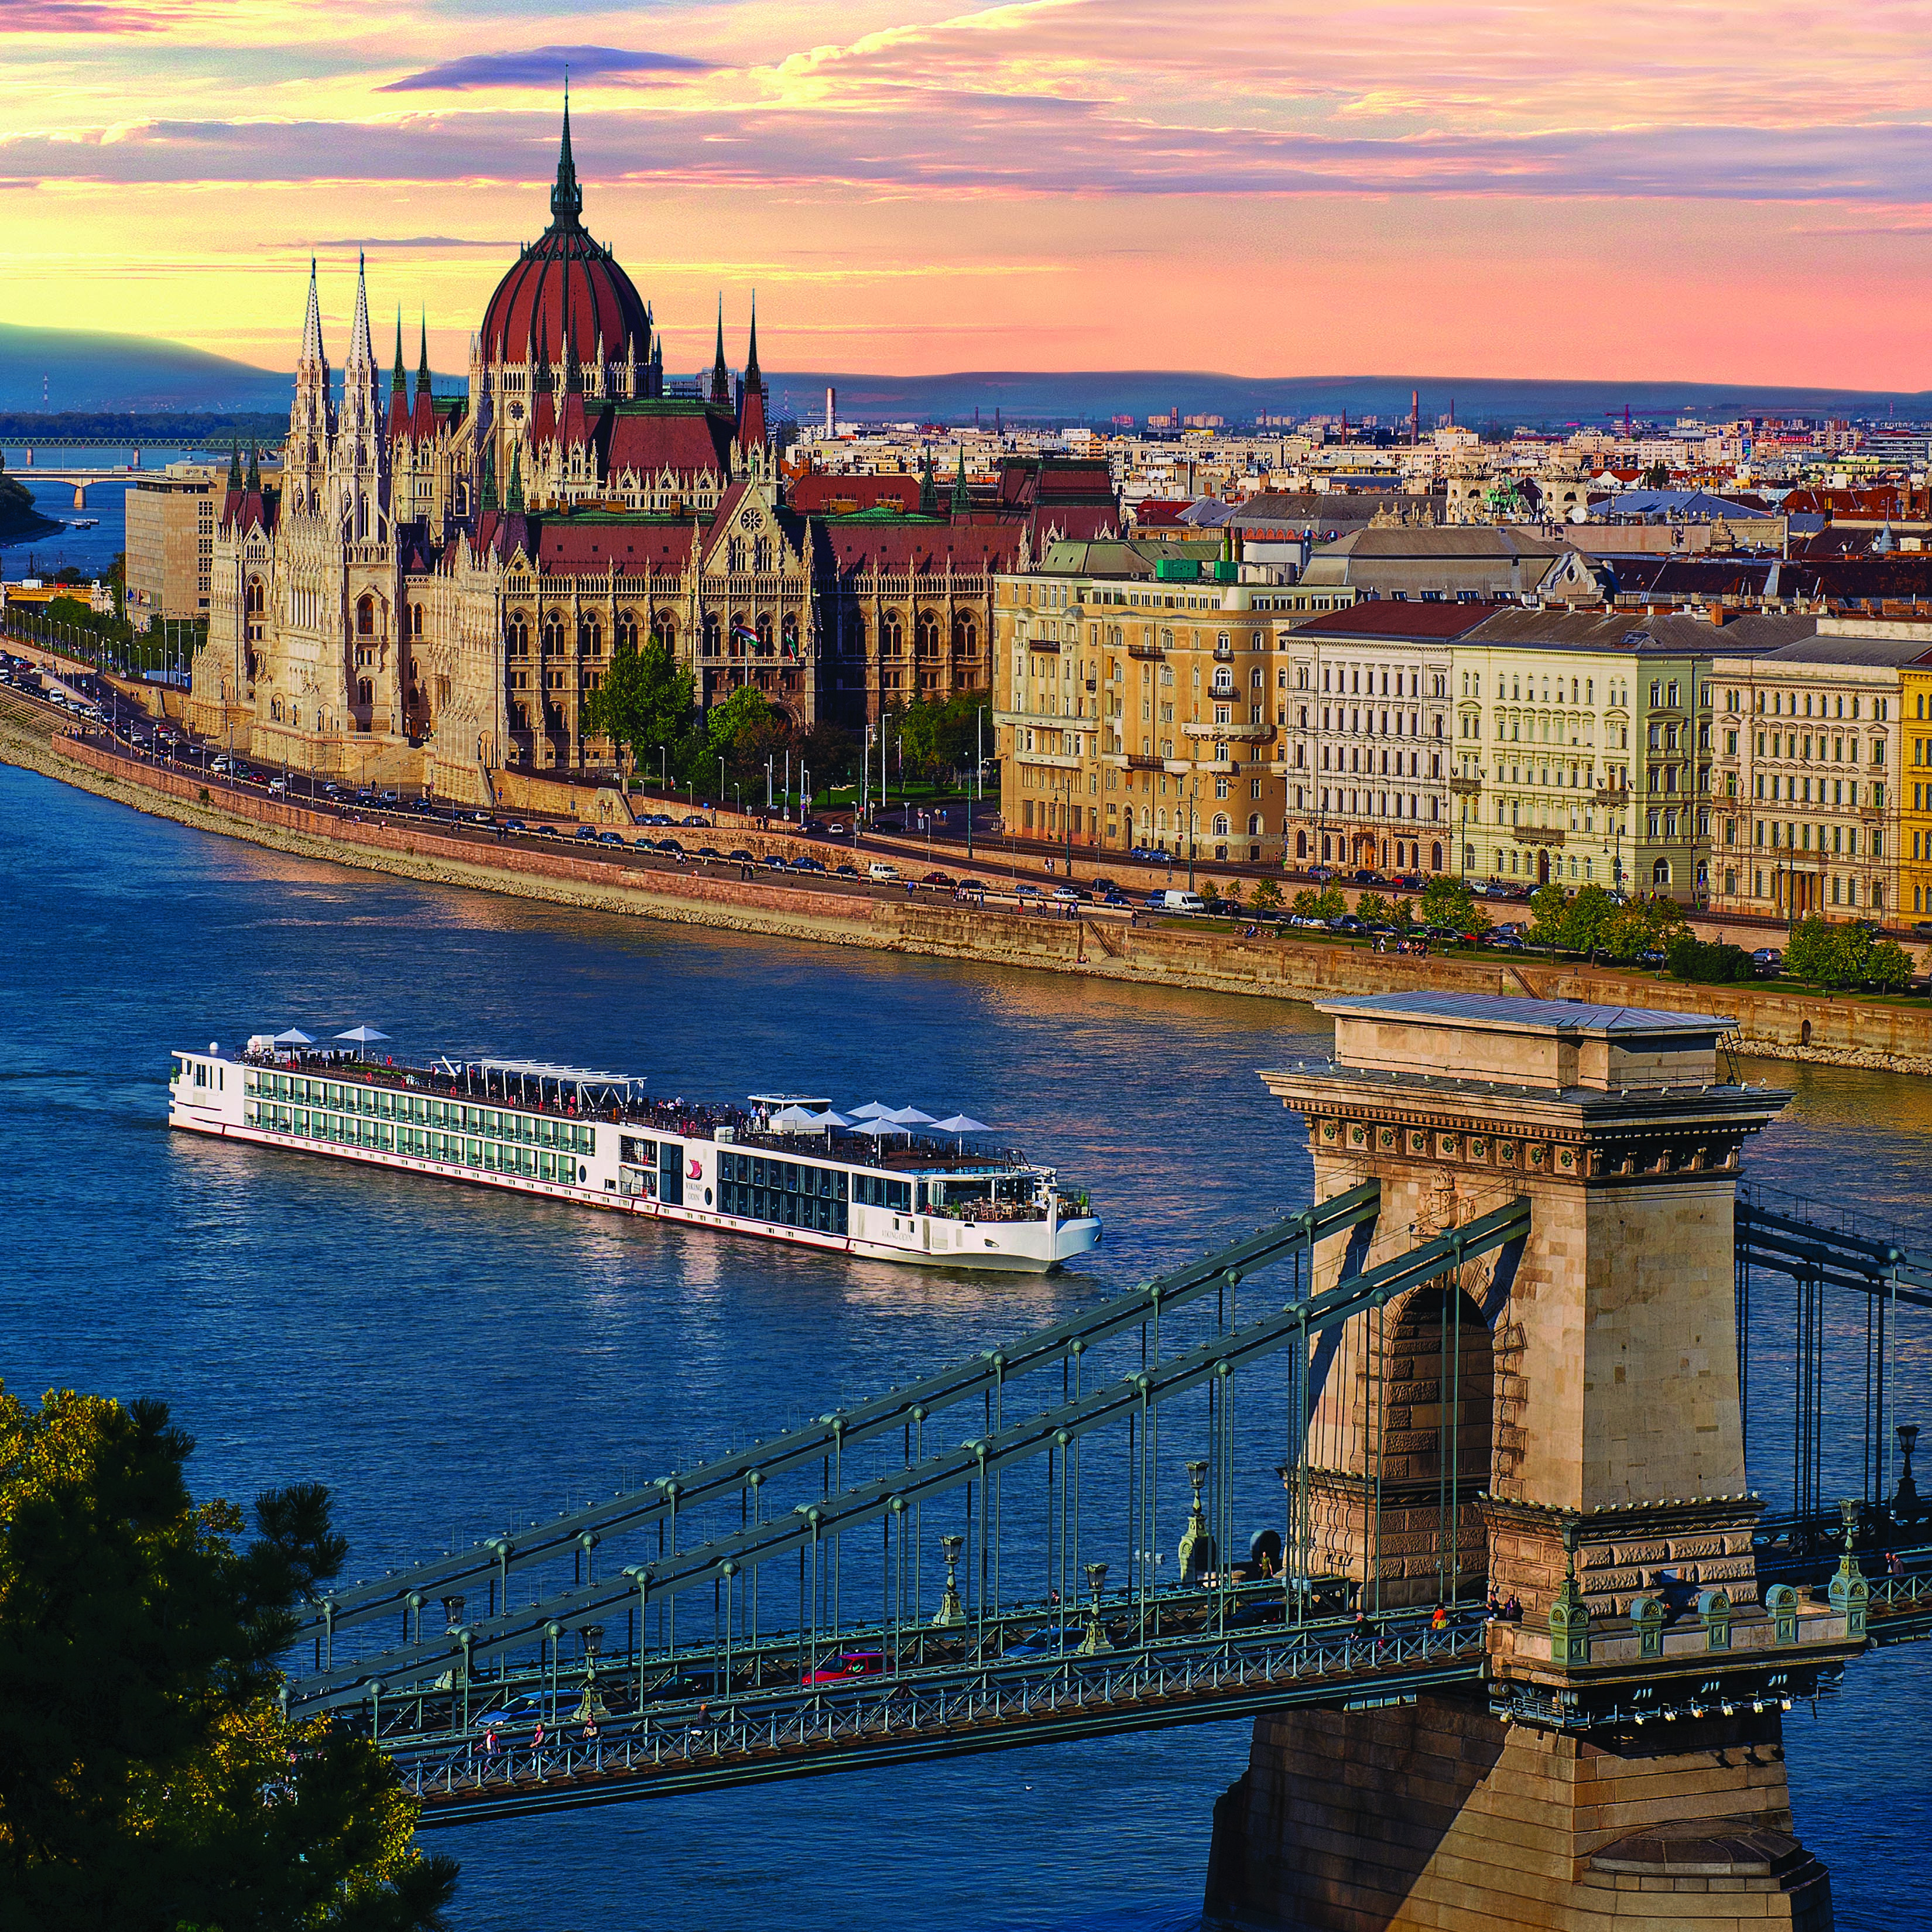 Photograph of the Chain Bridge in Budapest during a pink and yellow sunset, a river cruise is seen along the waterway